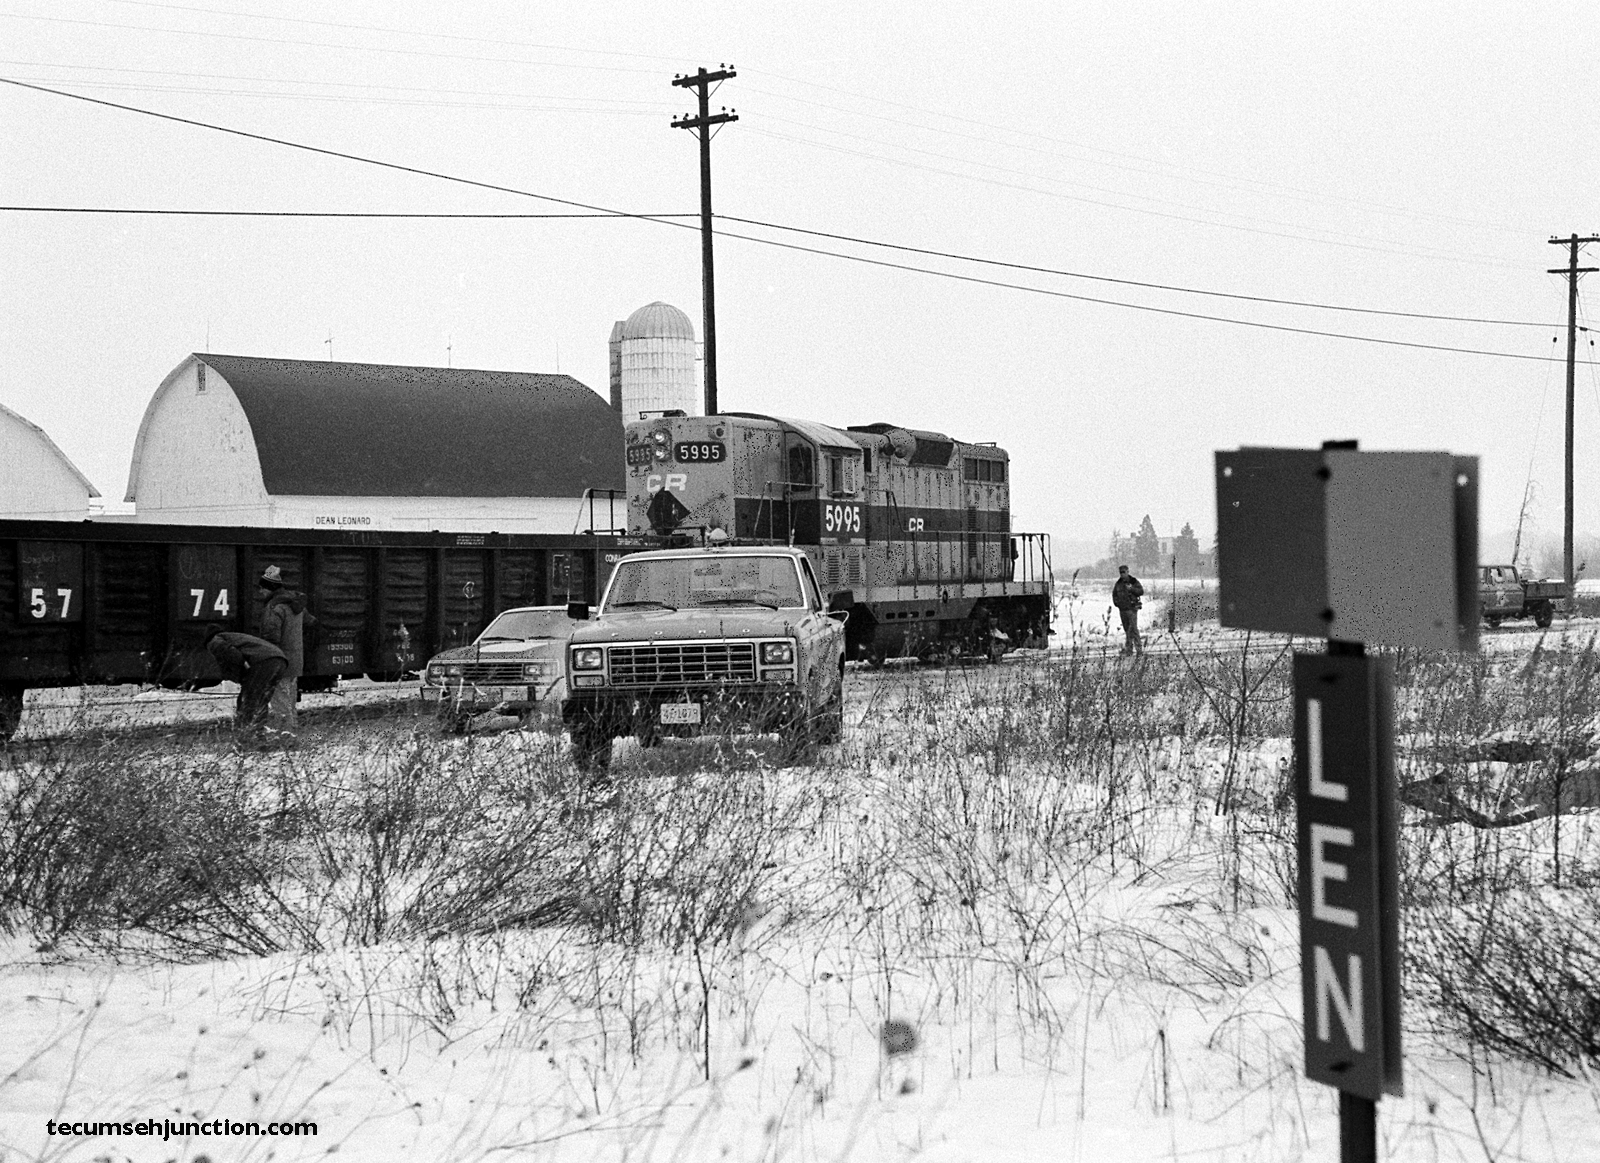 With the Lenawee Junction "LEN" block sign in the foreground, the train continues slowly backing across Deerfield Road.